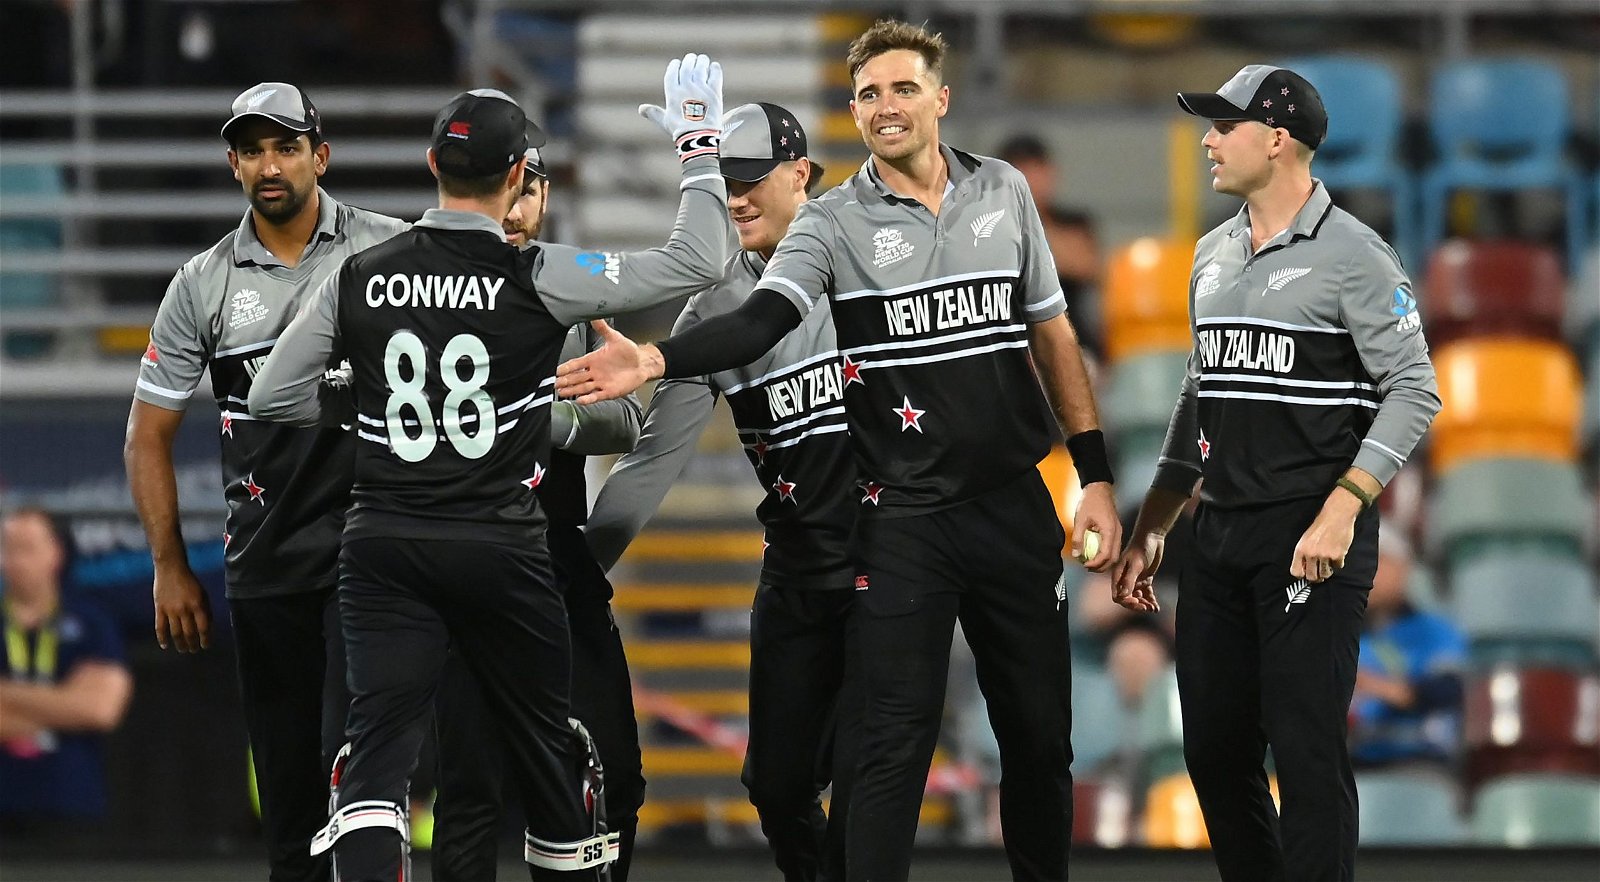 Ireland v New Zealand T20 World Cup 2022 Live Telecast TV channels, Live Streaming IRE vs NZ